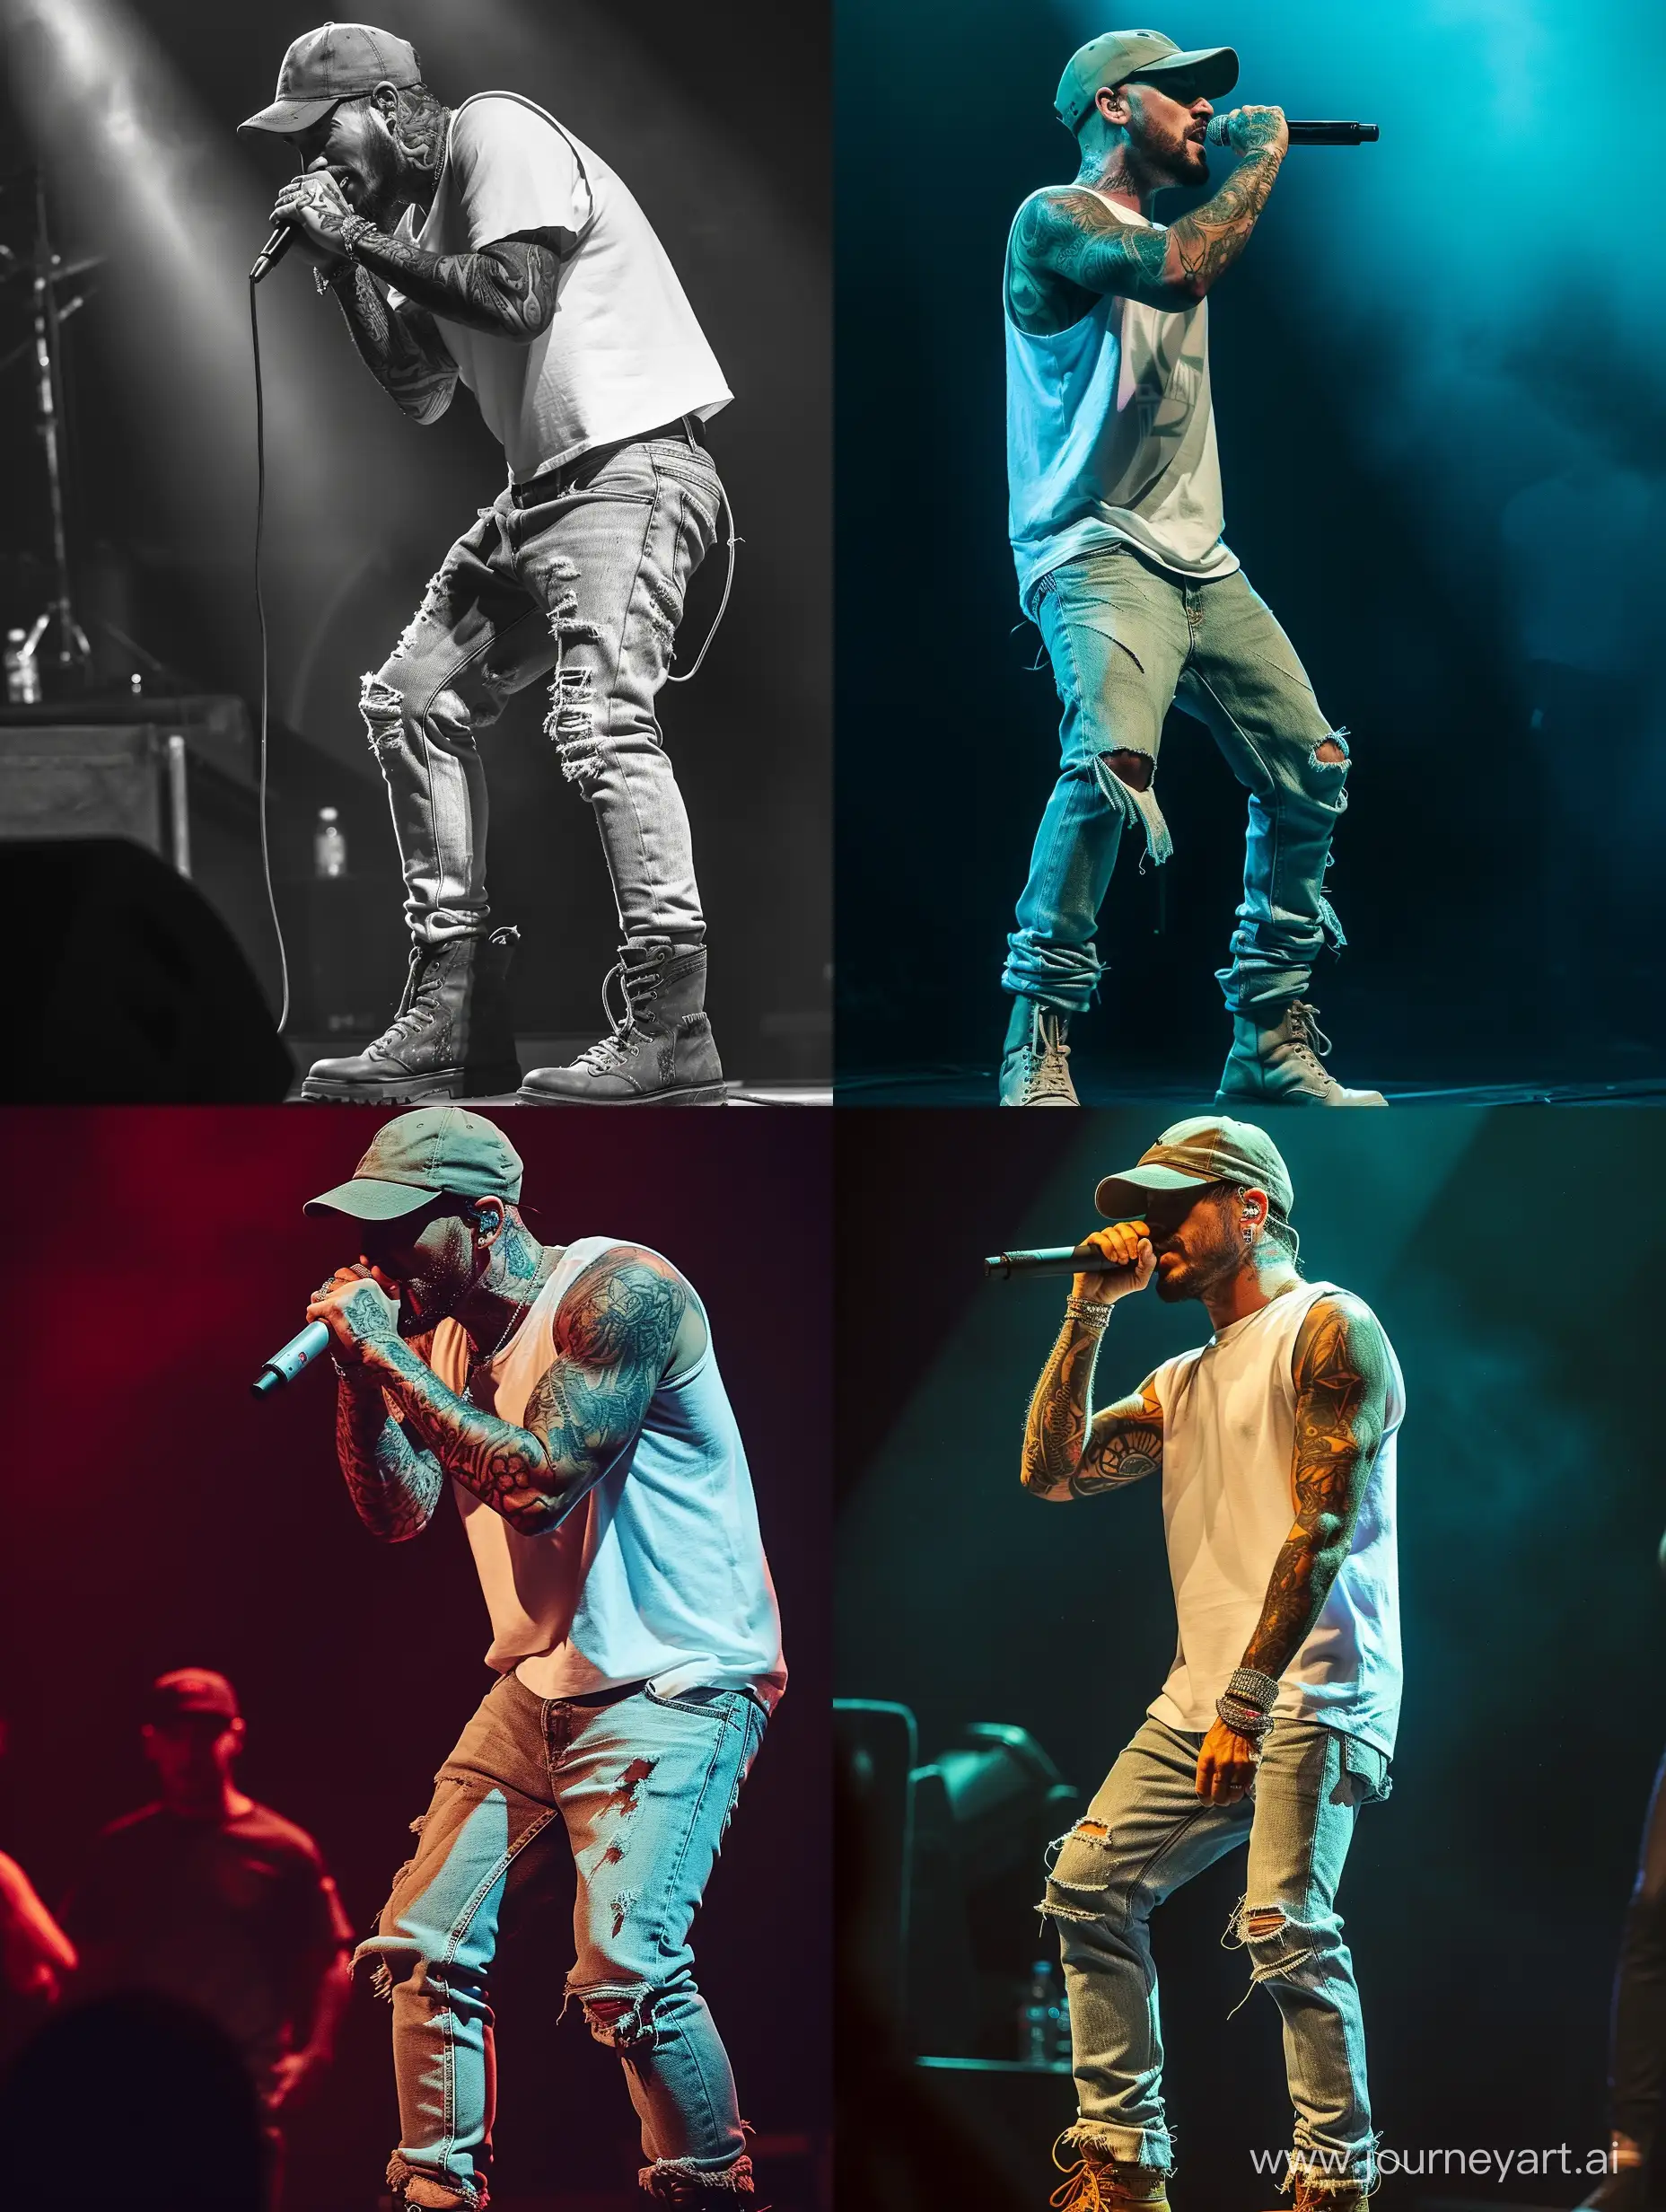 one male singer on stage, full body, holding microphone, tattoos, hip-hop, wearing a cap, white sleeveless t-shirt, loose jeans, untied boots, facial hair, 